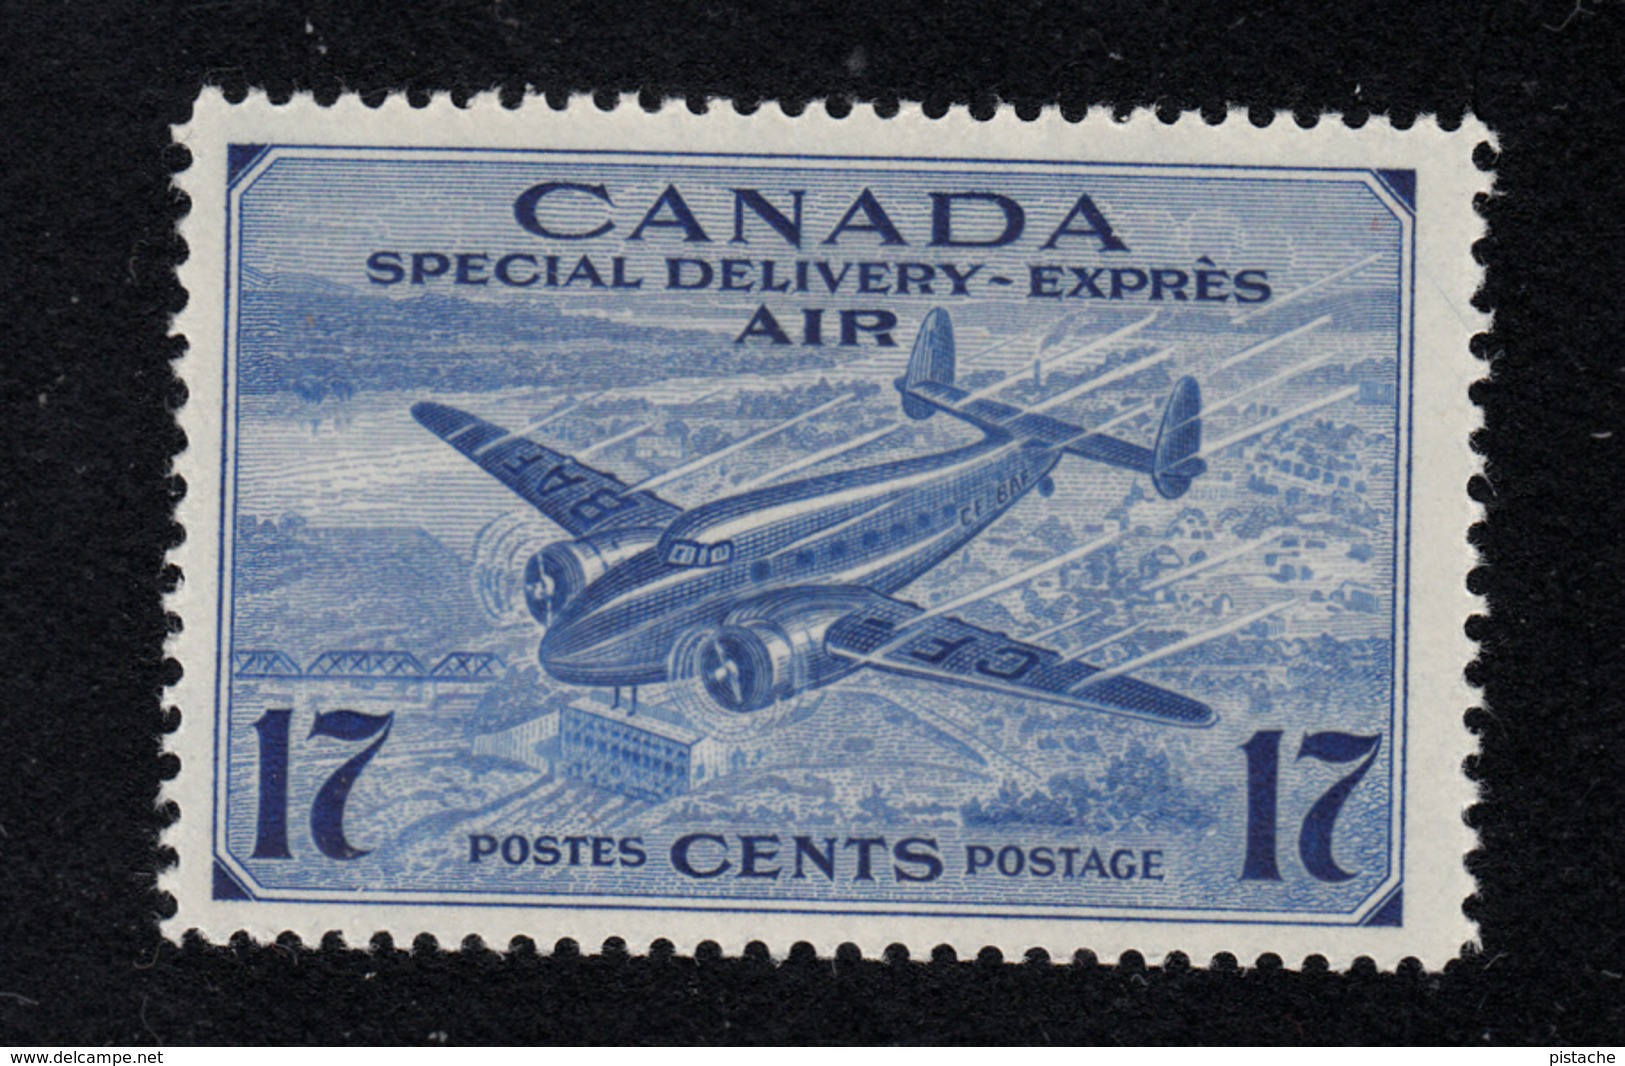 Canada Air Mail Special Delivery Stamp CE2 - Mint Never Hinged - VF Condition - Luftpost-Express